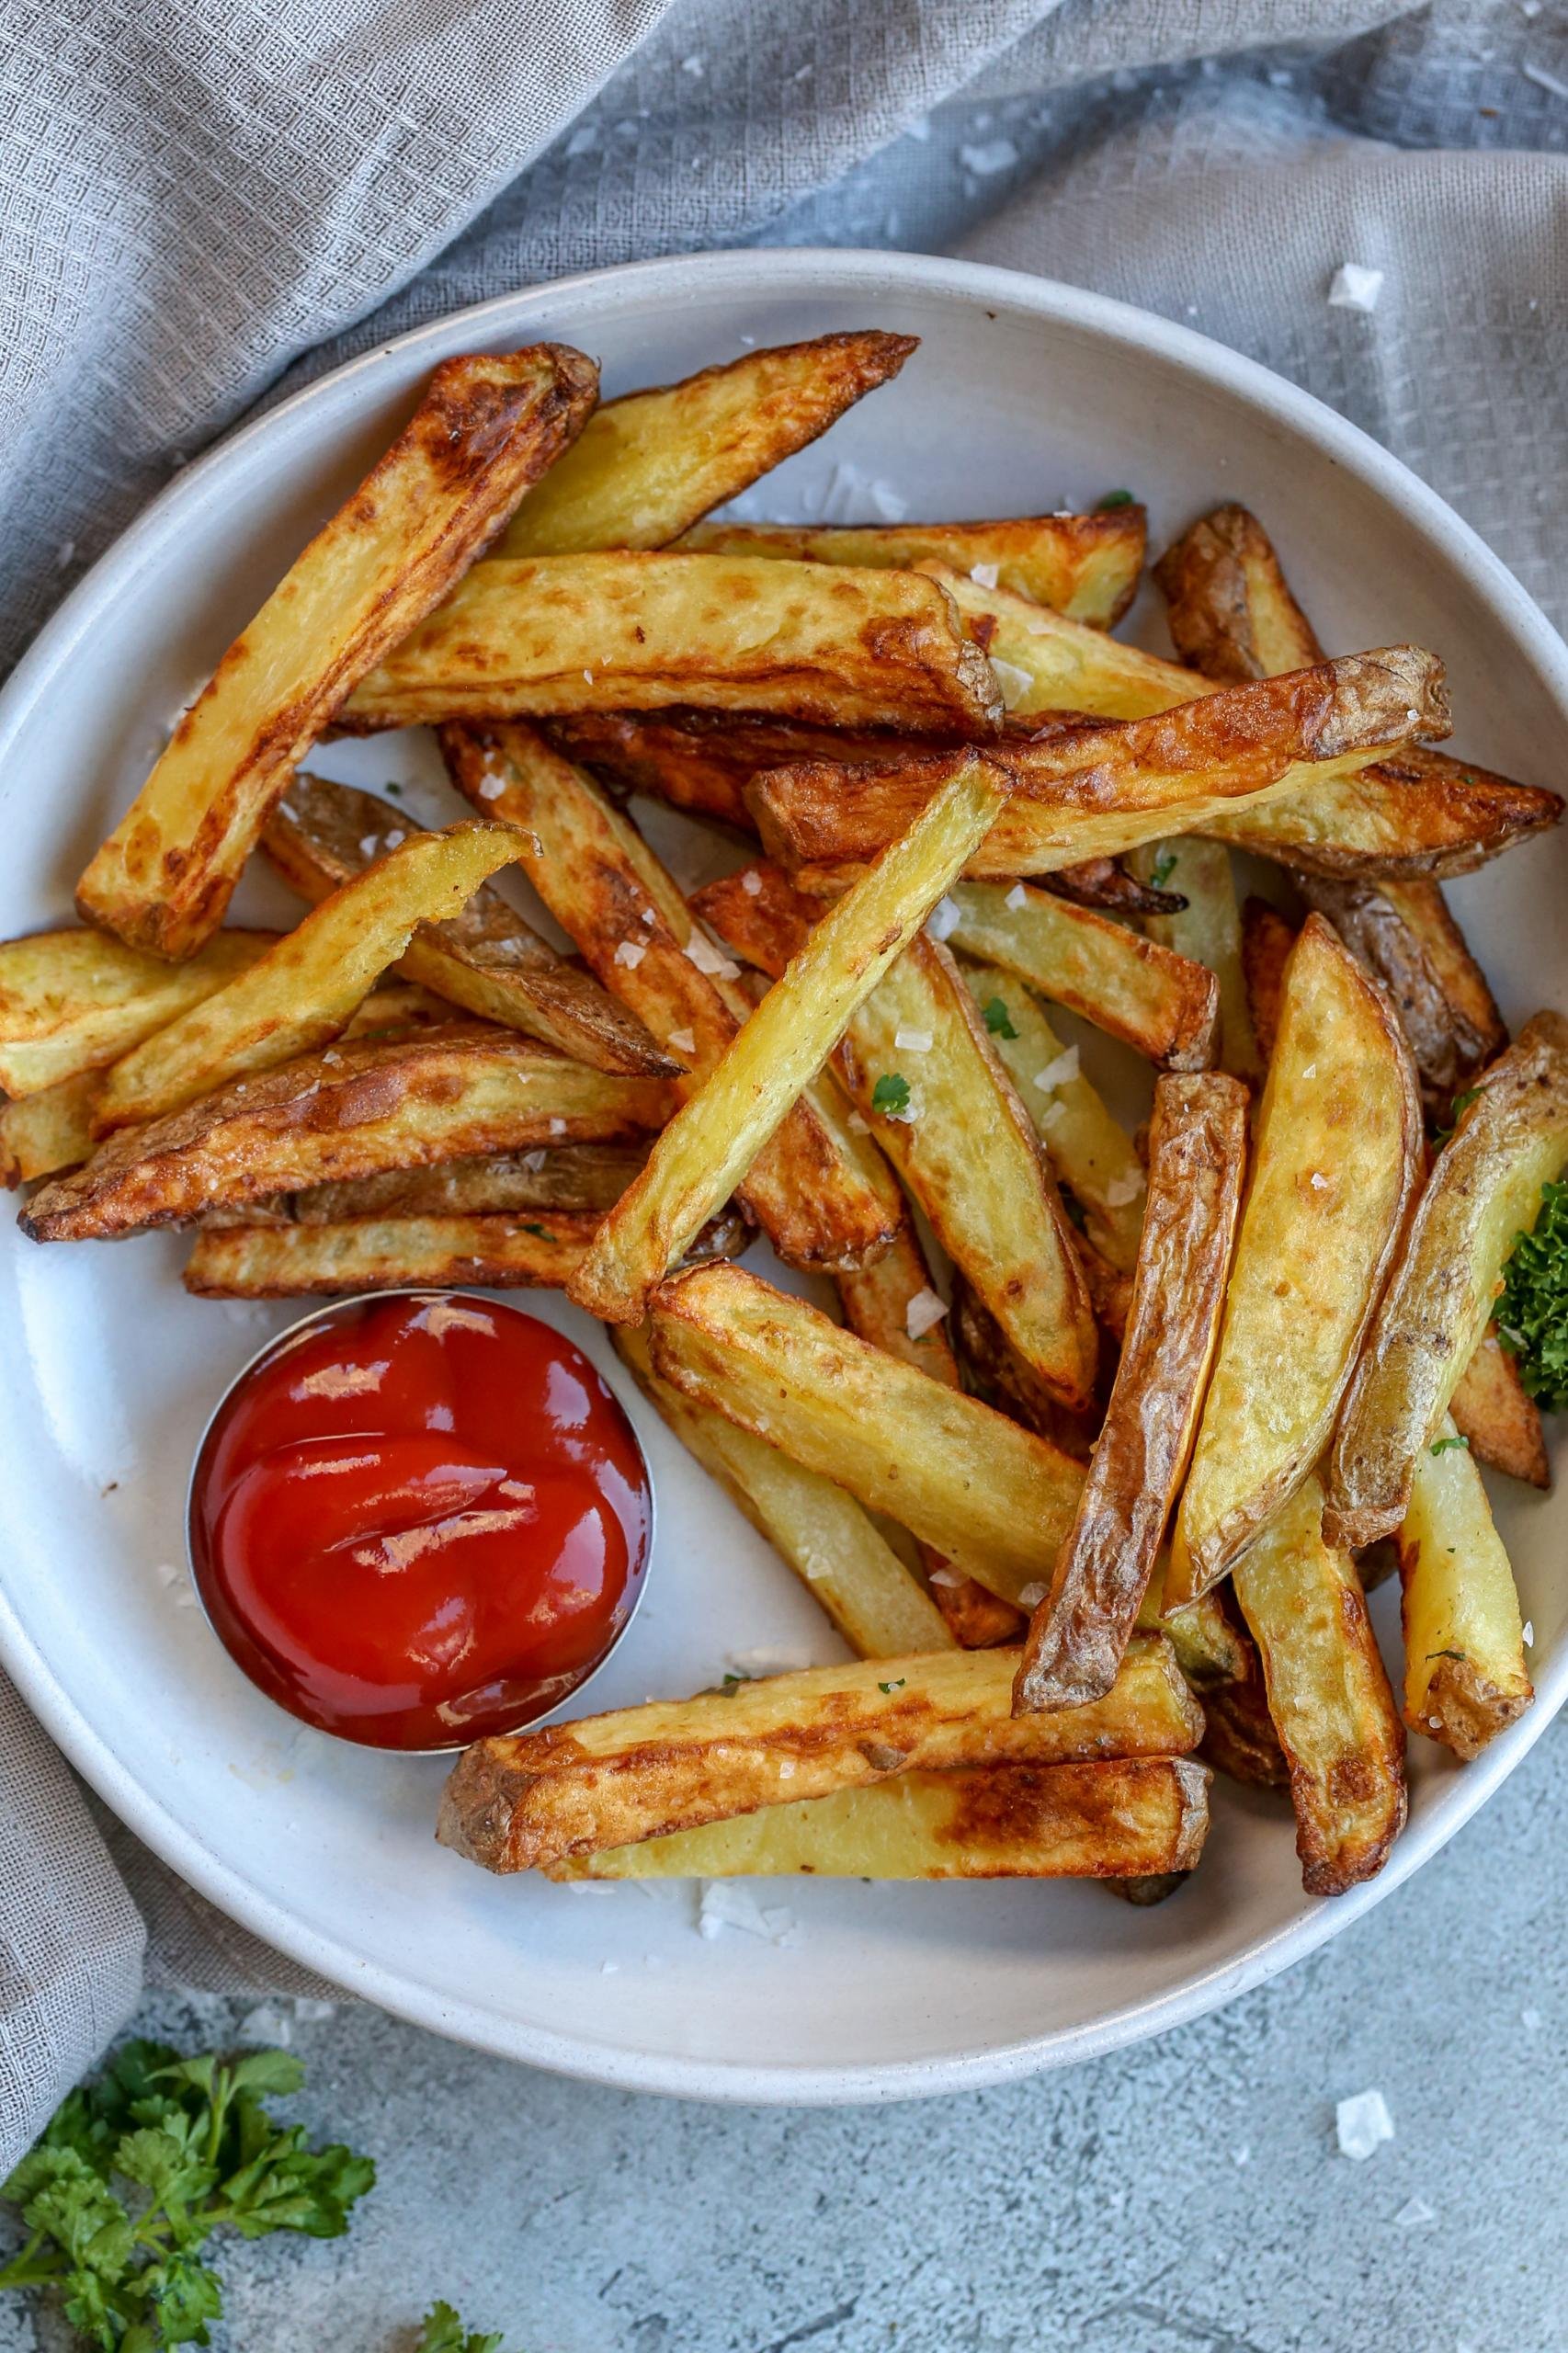 15-Minute Air Fryer French Fries (So Easy!) - Momsdish